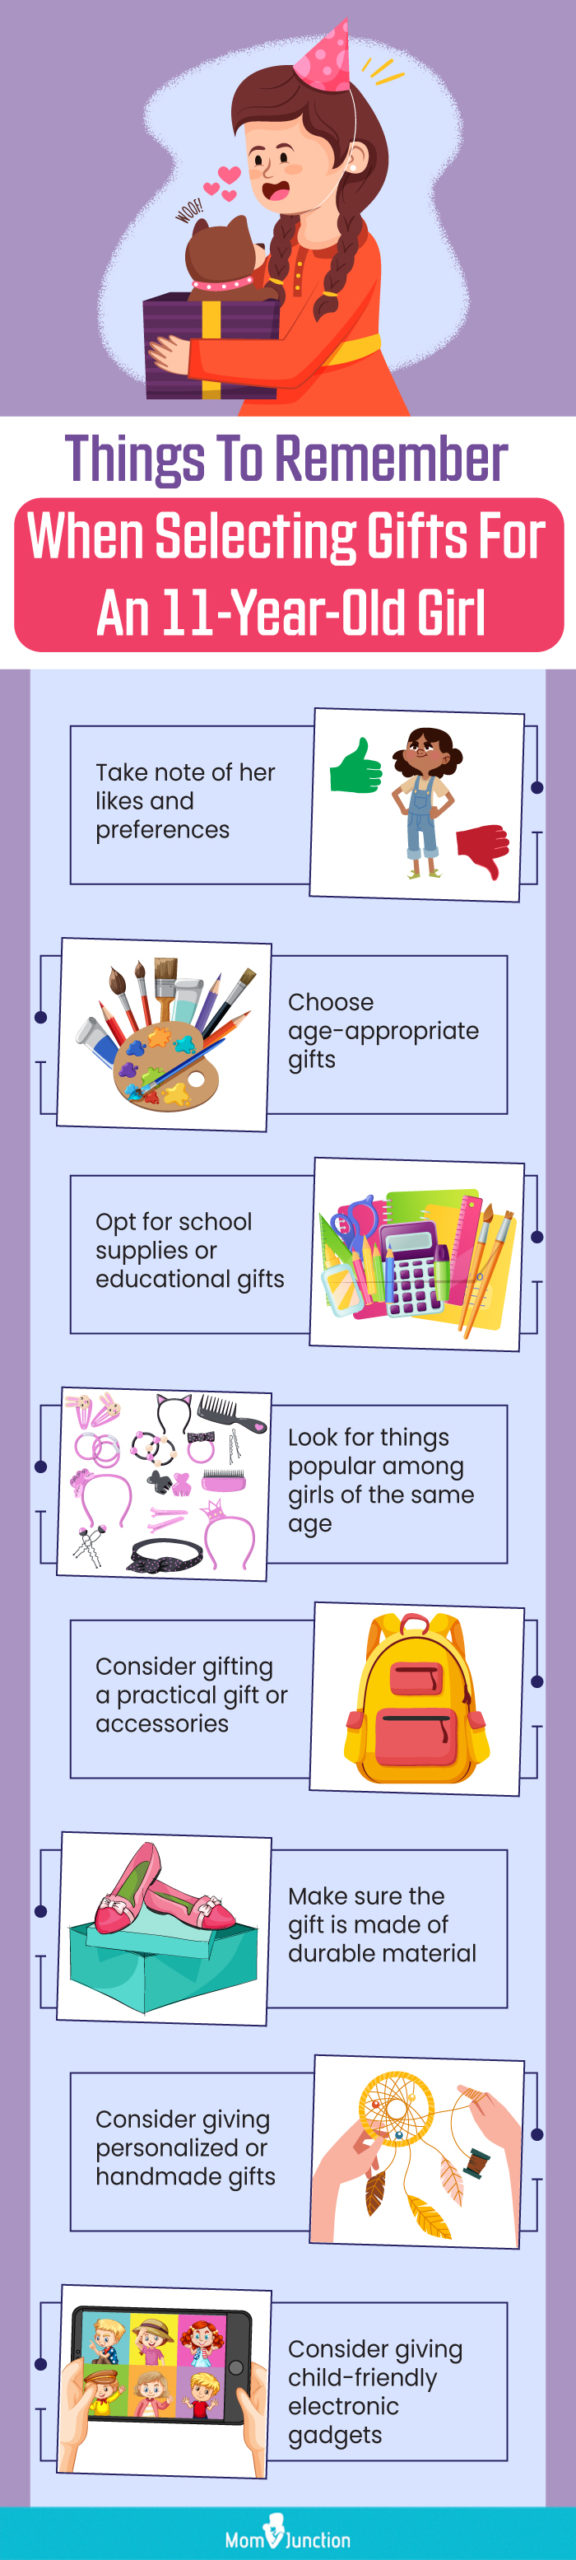 Things To Remember When Selecting Gifts For An 11 Year Old Girl (infographic)